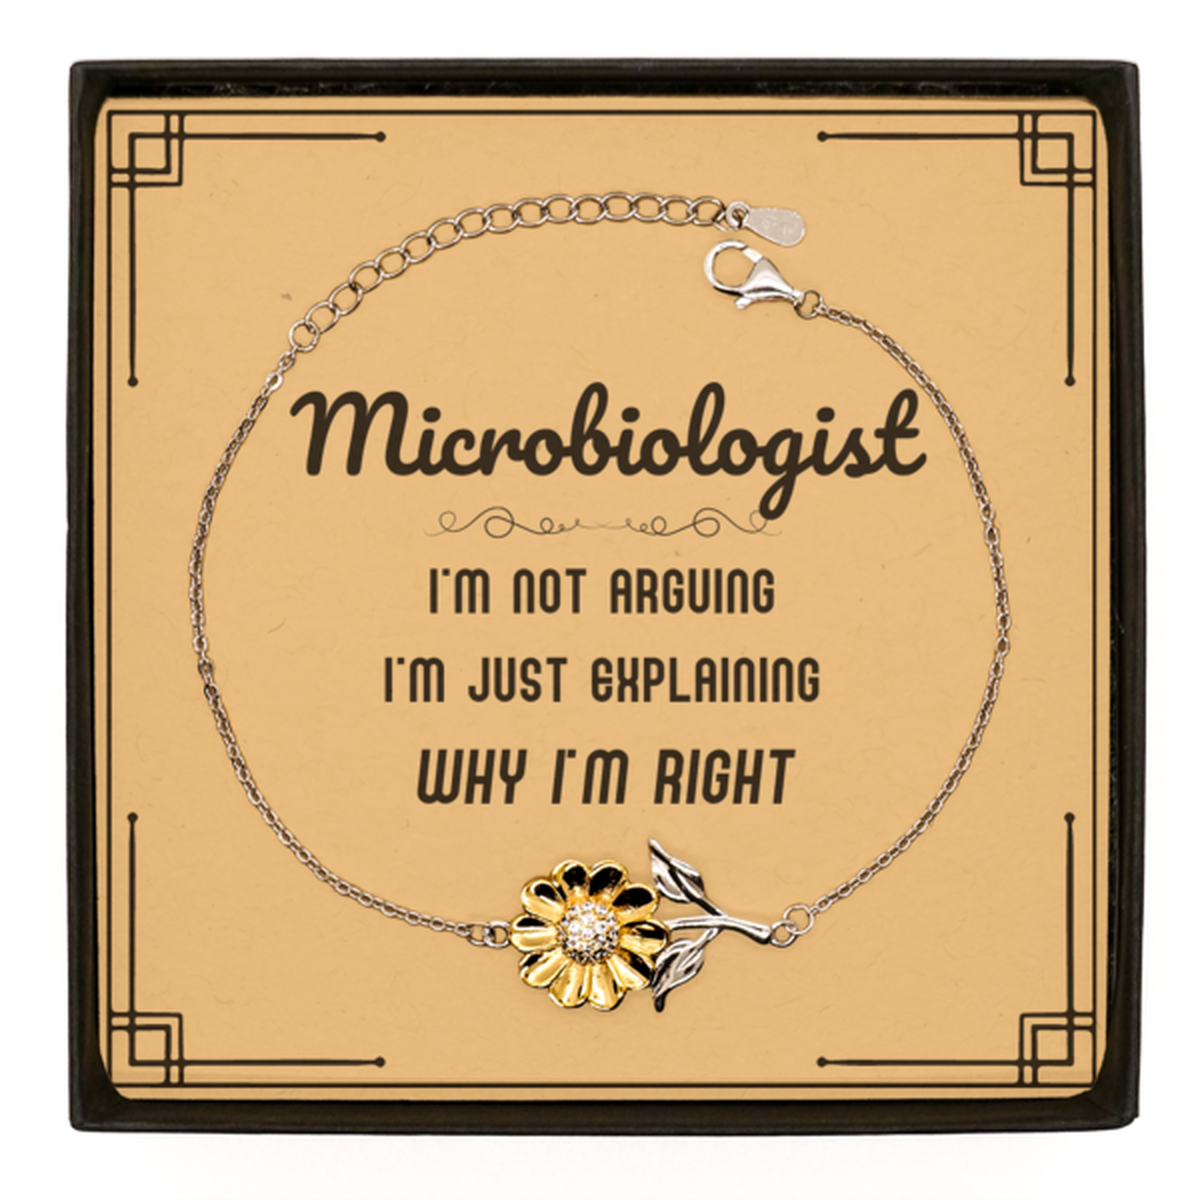 Microbiologist I'm not Arguing. I'm Just Explaining Why I'm RIGHT Sunflower Bracelet, Funny Saying Quote Microbiologist Gifts For Microbiologist Message Card Graduation Birthday Christmas Gifts for Men Women Coworker